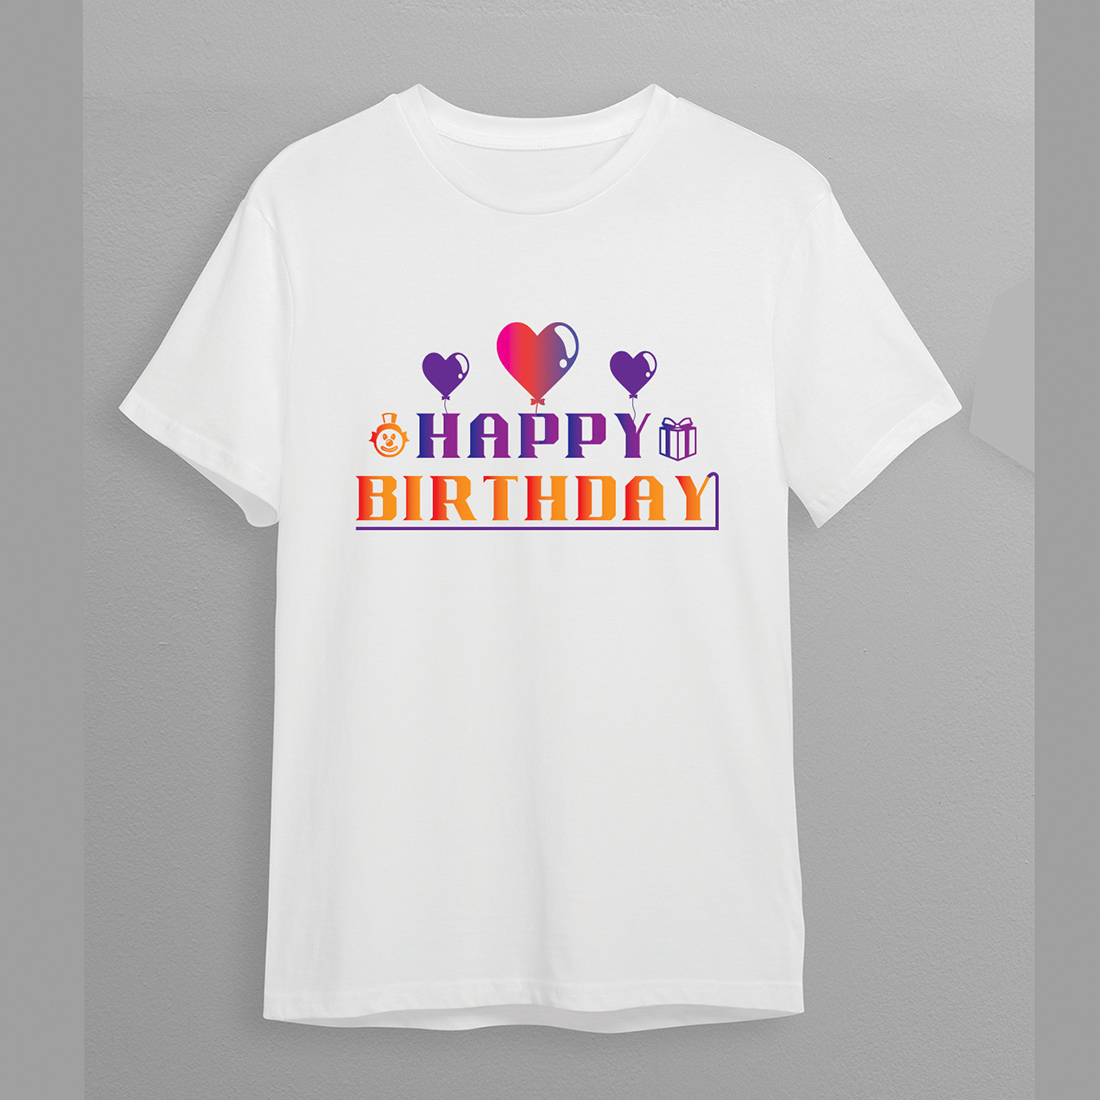 happy birthday and t shirt logo design preview image.